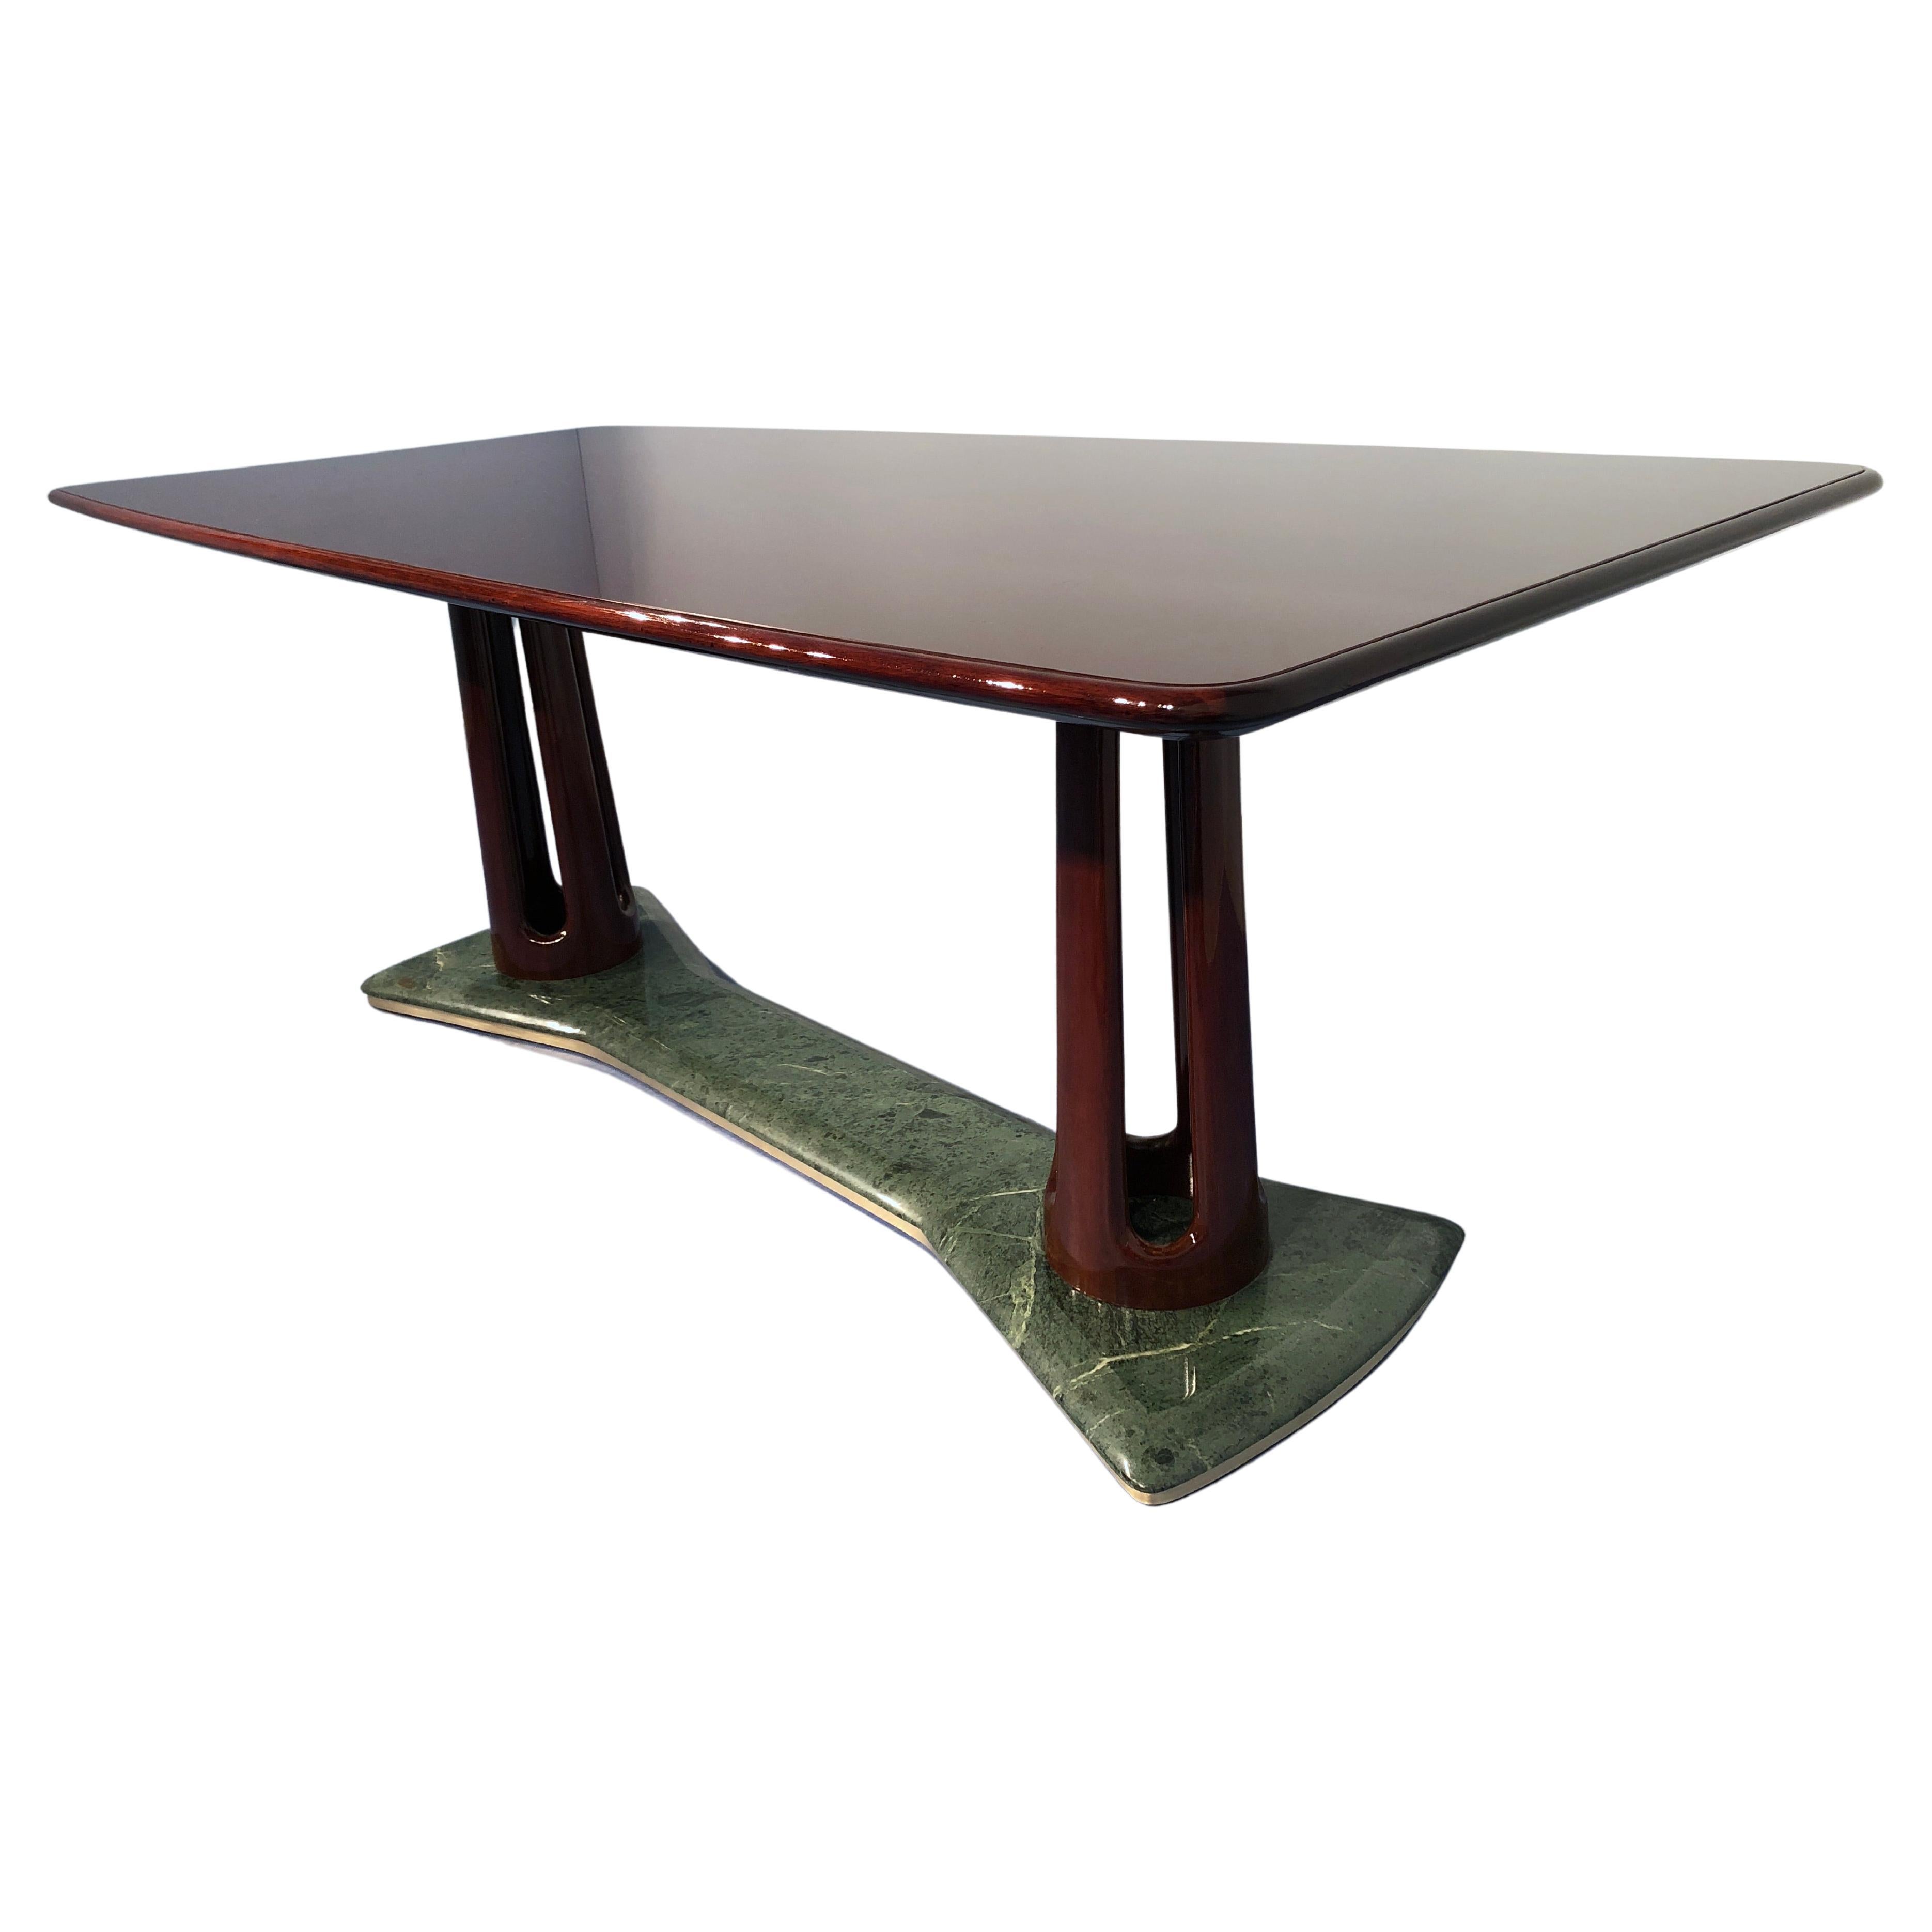 This masterpiece has been manufactured by Vittorio Dassi in 1950 and is a magnificent example of the Italian design of the period. It composed of precious mahogany wood, fine colored glass on the top, and Dolomiti Green Alps marble banded with